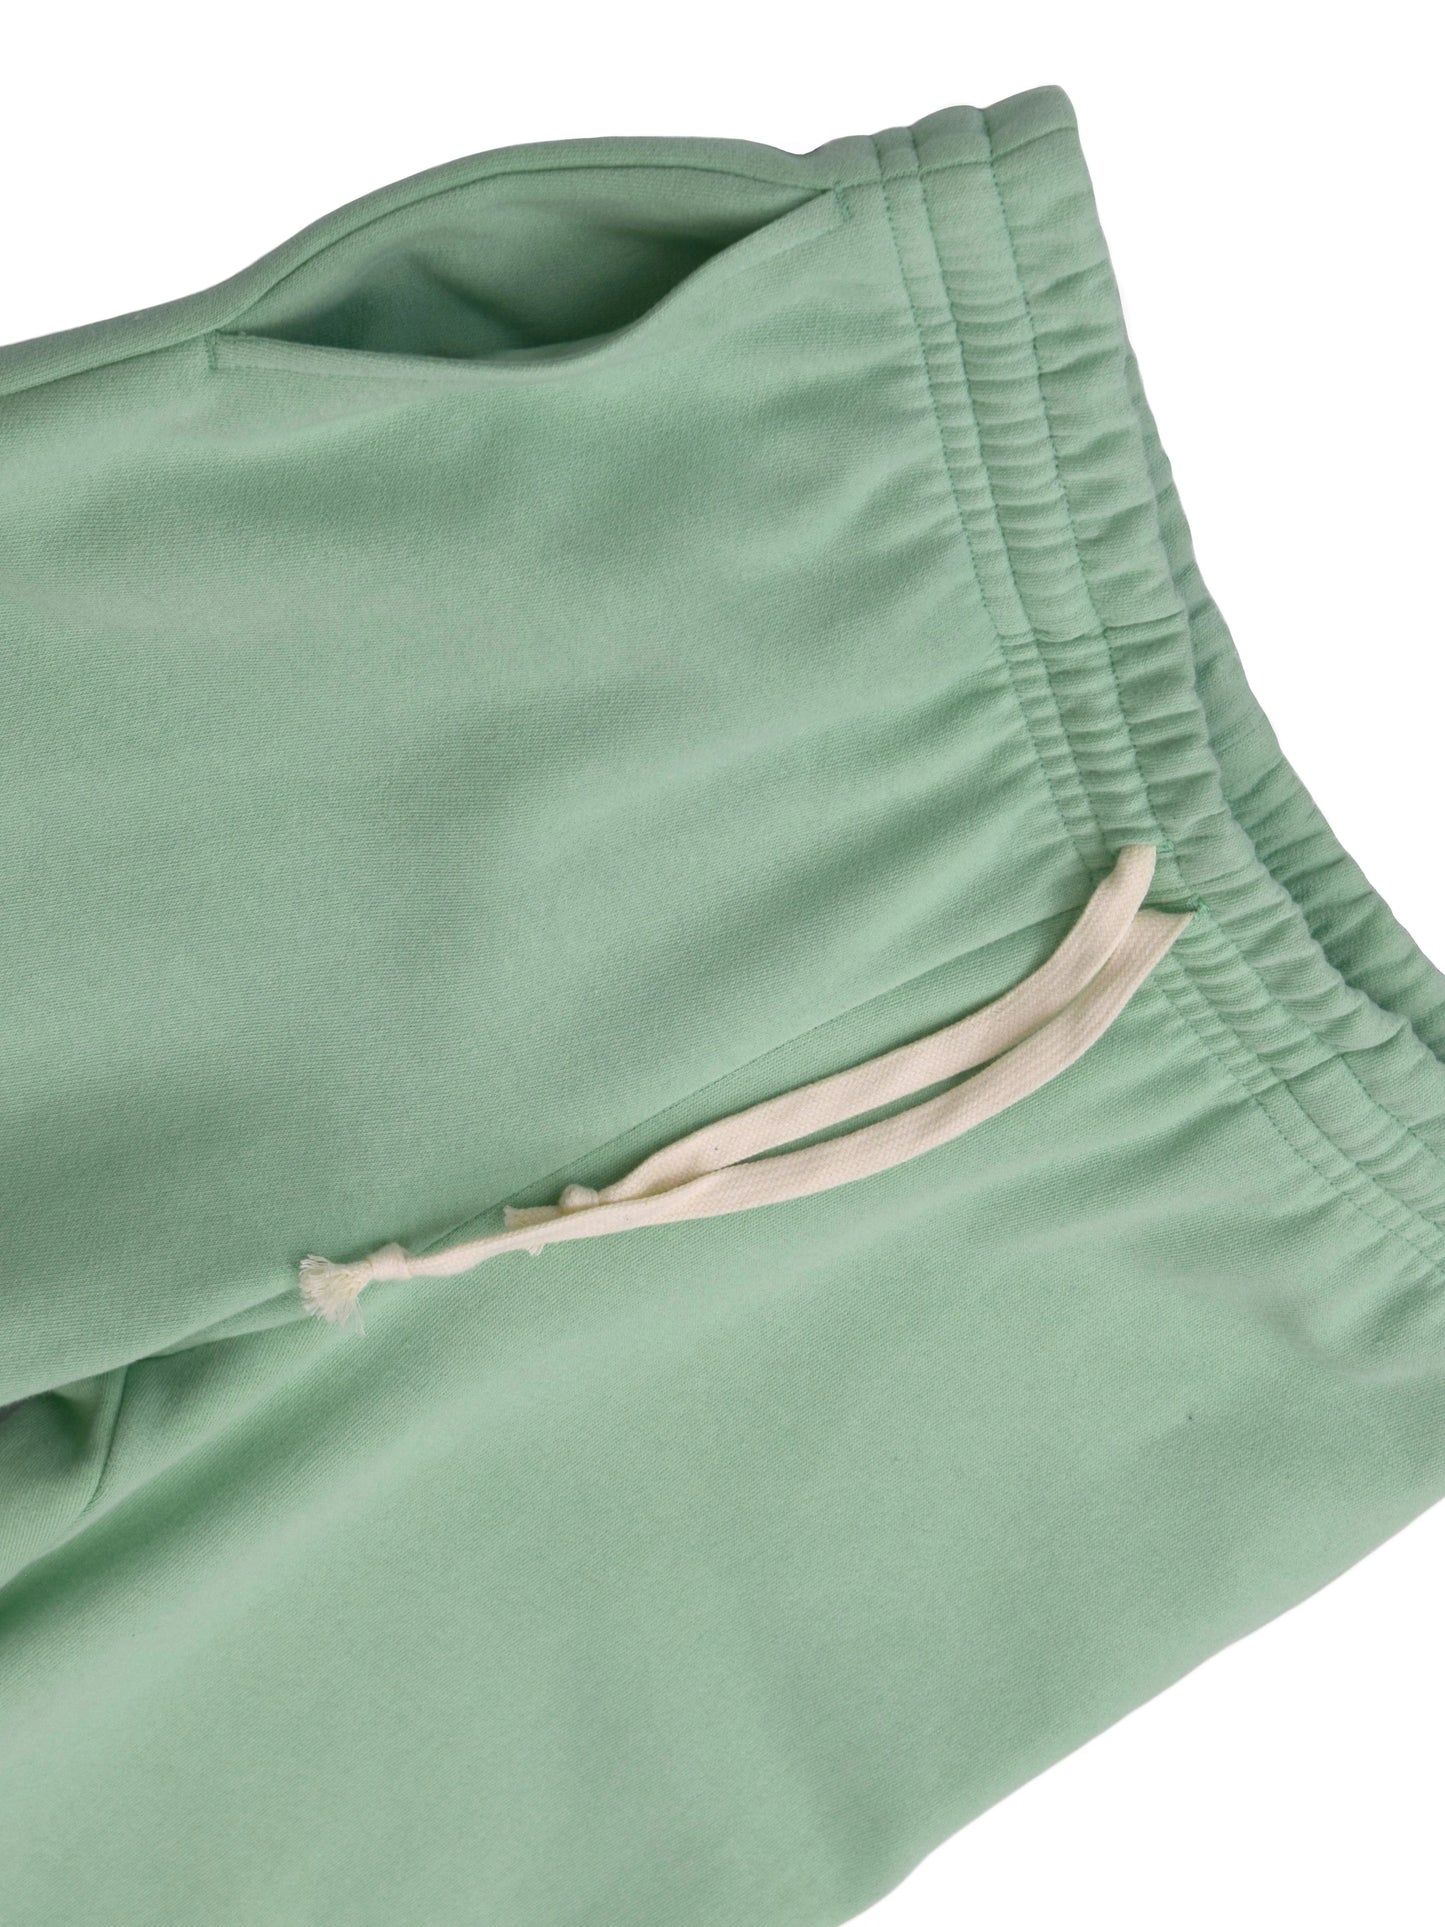 Angle showing soft texture of mint green cotton fabric.